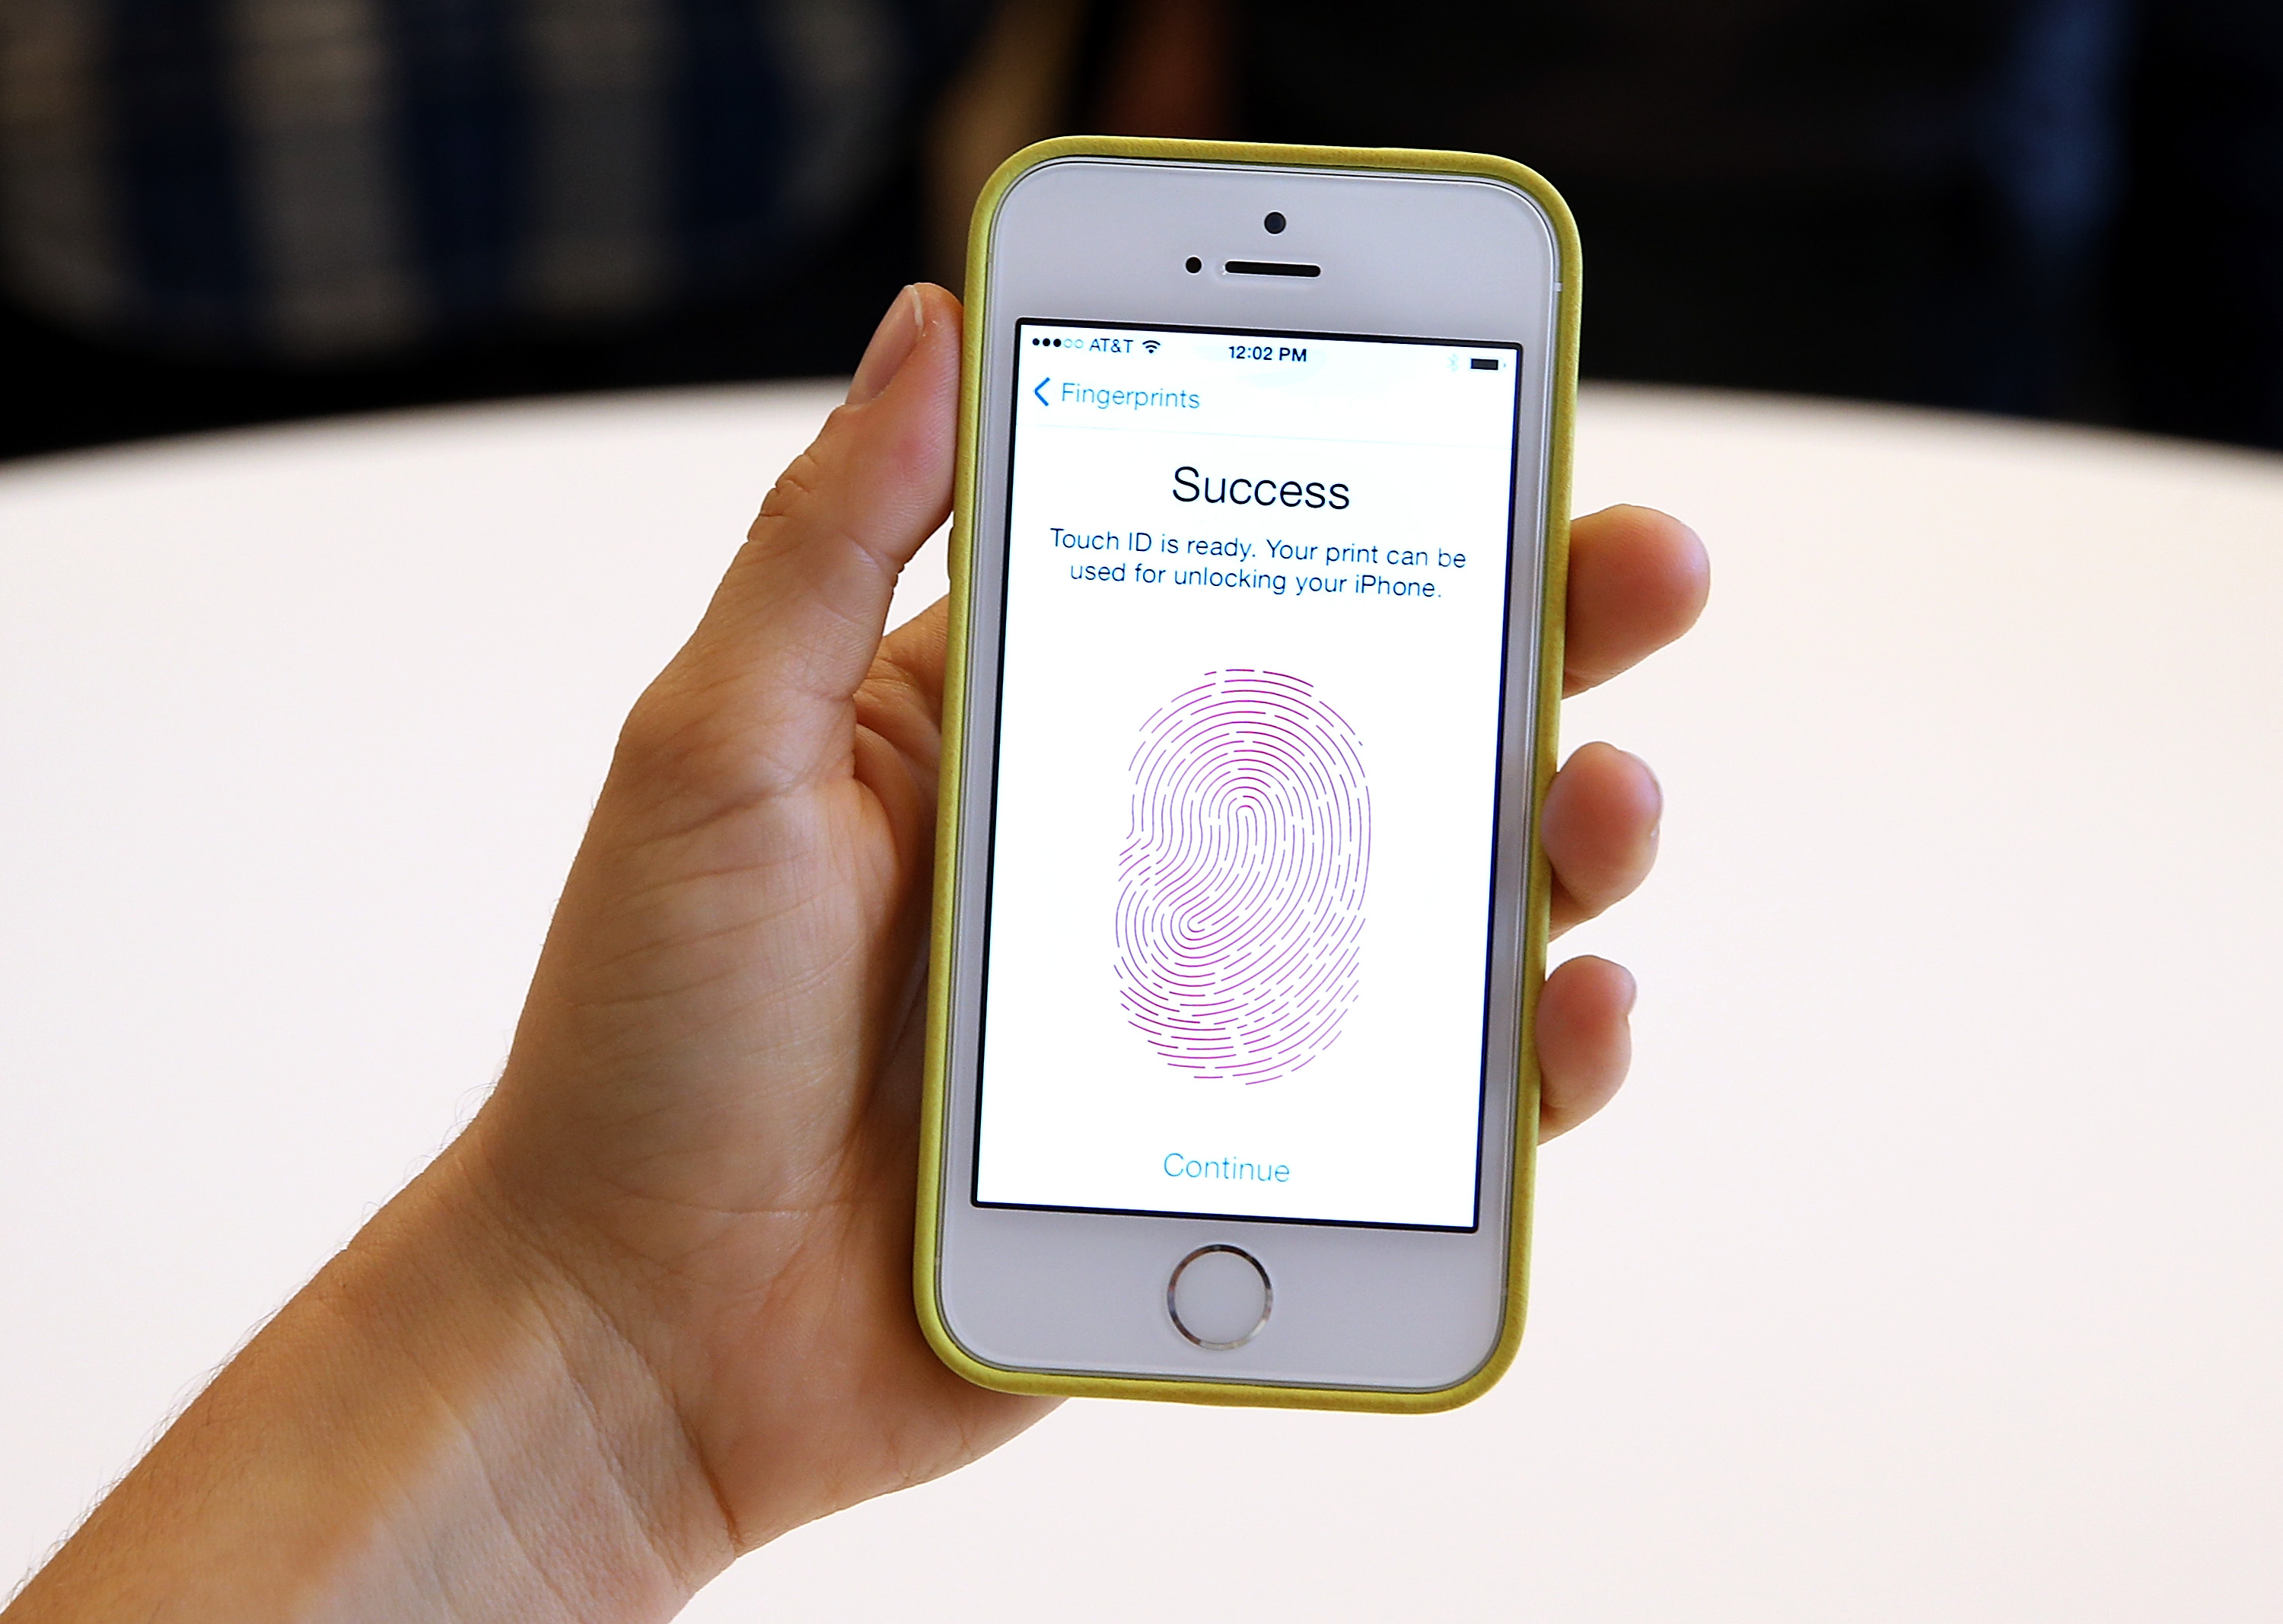 The new iPhone 5S with fingerprint technology is displayed during an Apple product announcement at the Apple campus on September 10, 2013 in Cupertino, California. (Justin Sullivan—Getty Images)